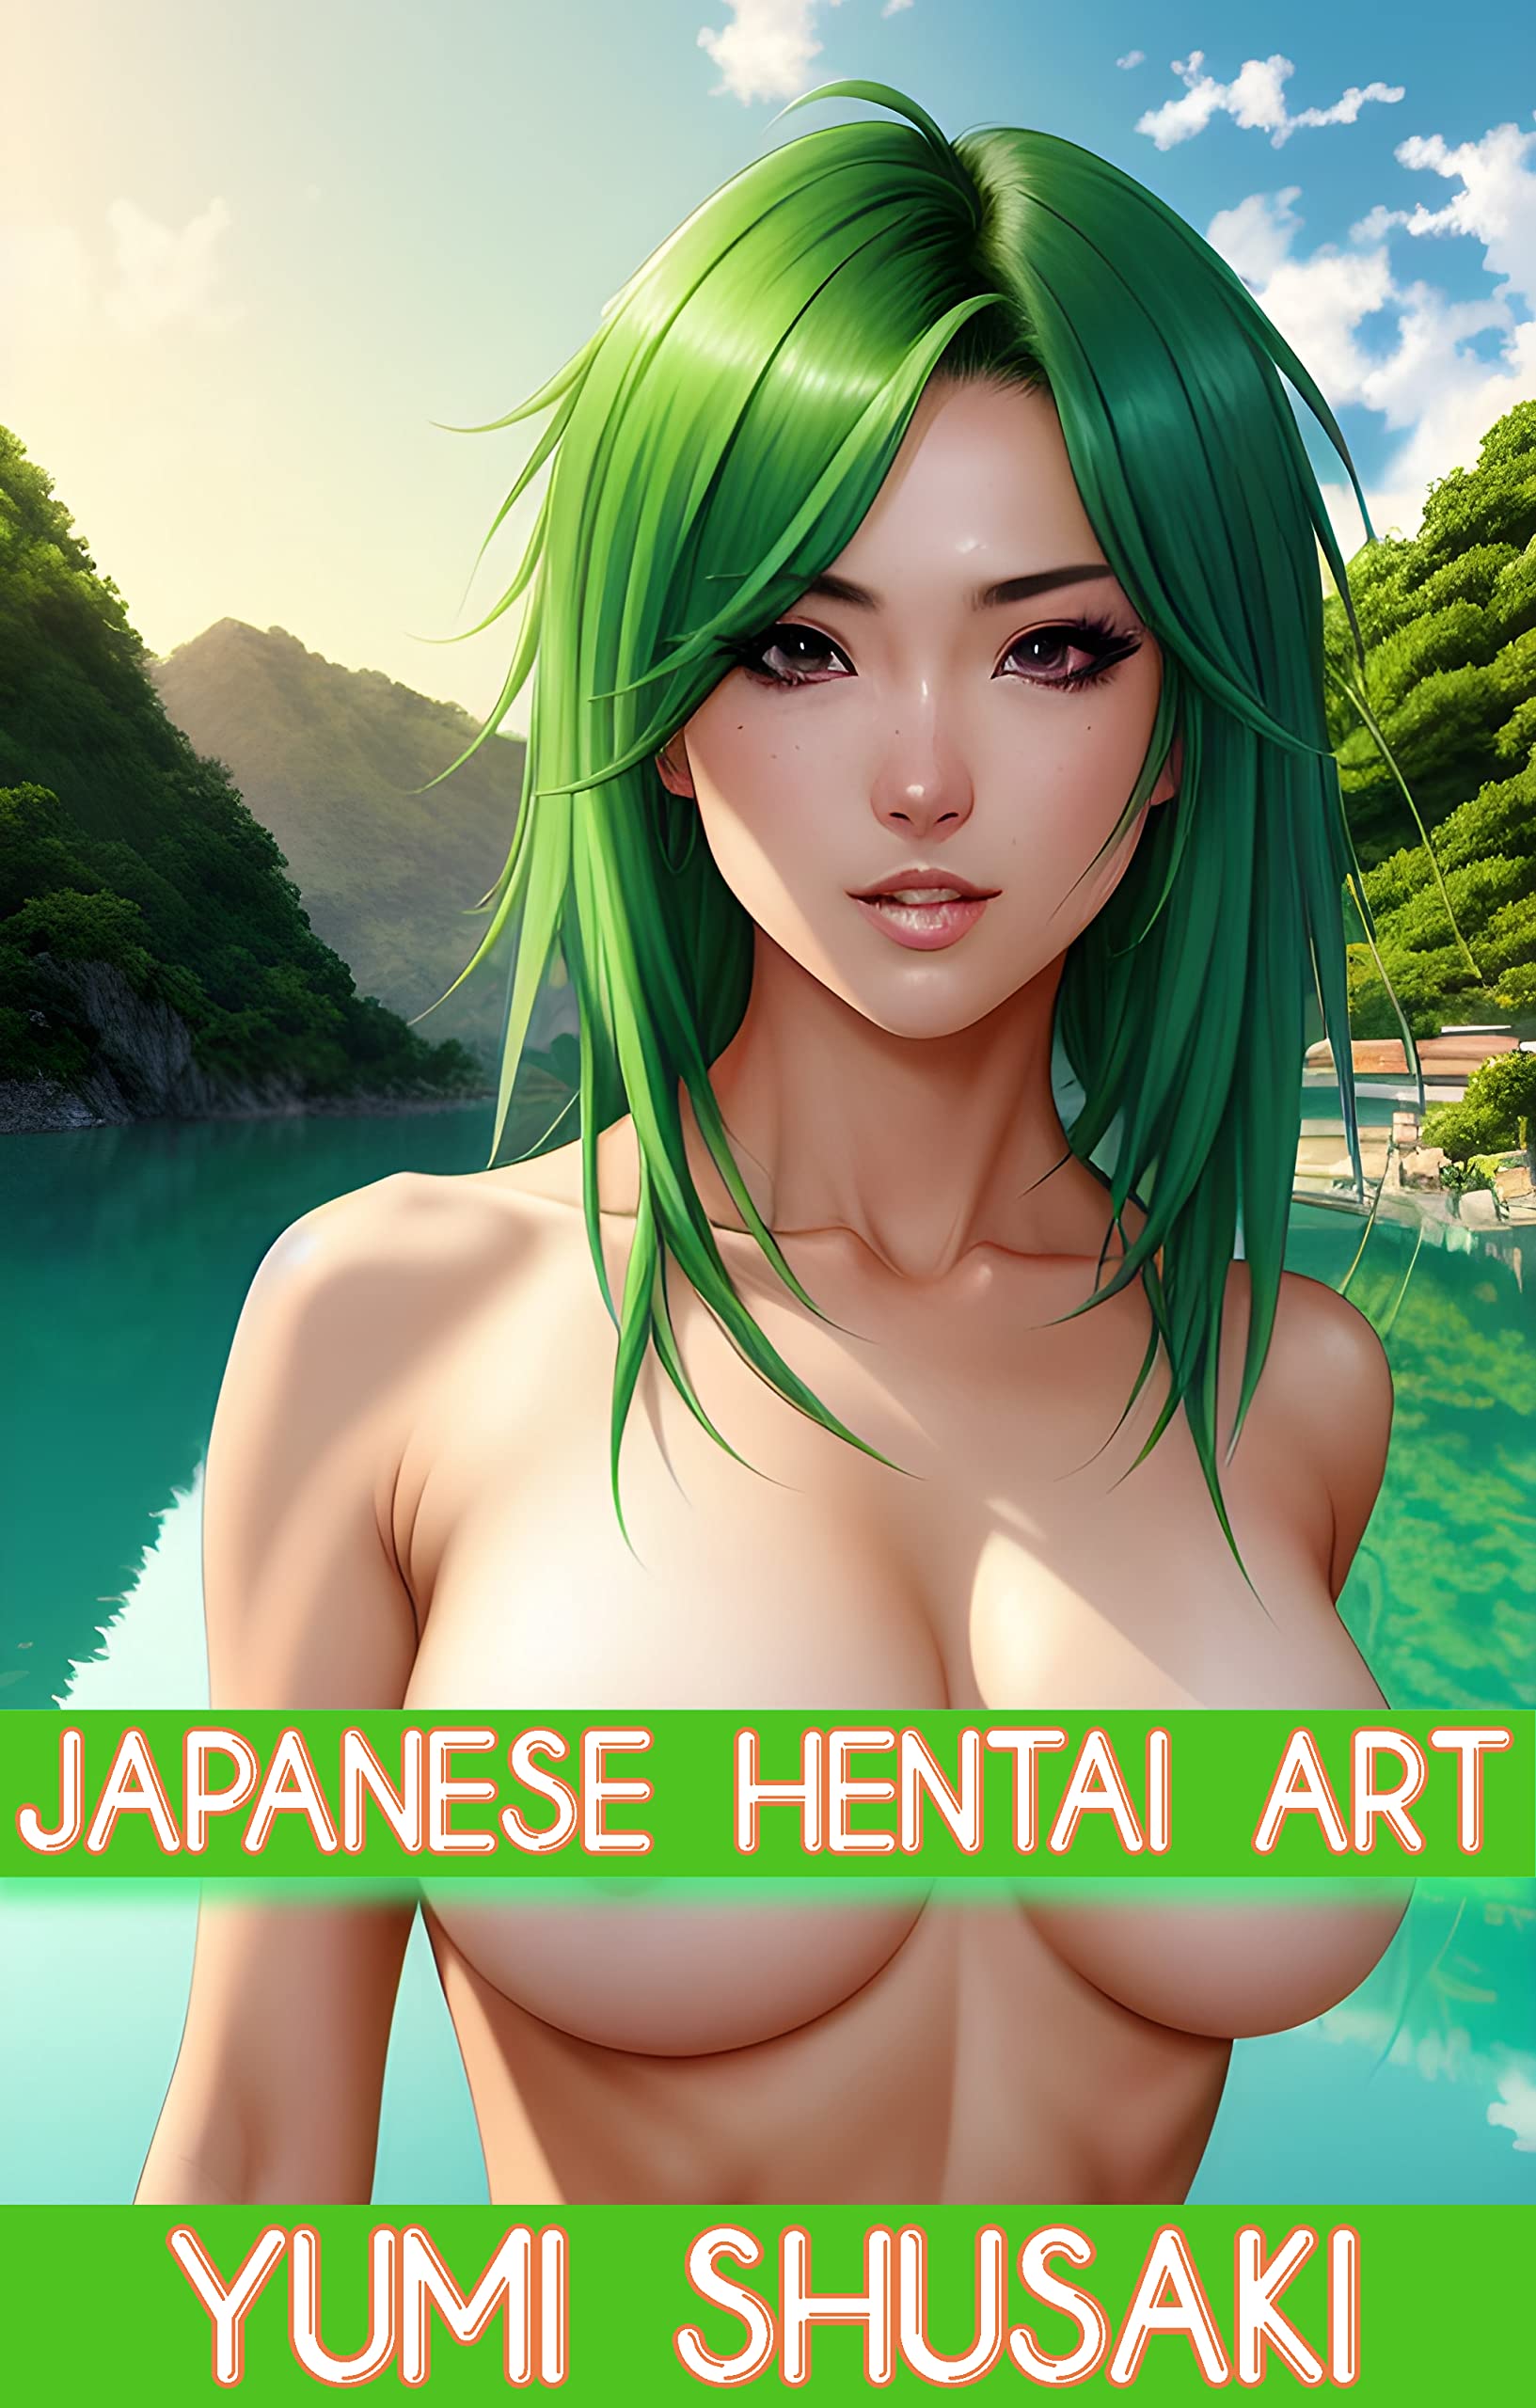 cavin cooper recommends sexy anime girl hentai pic